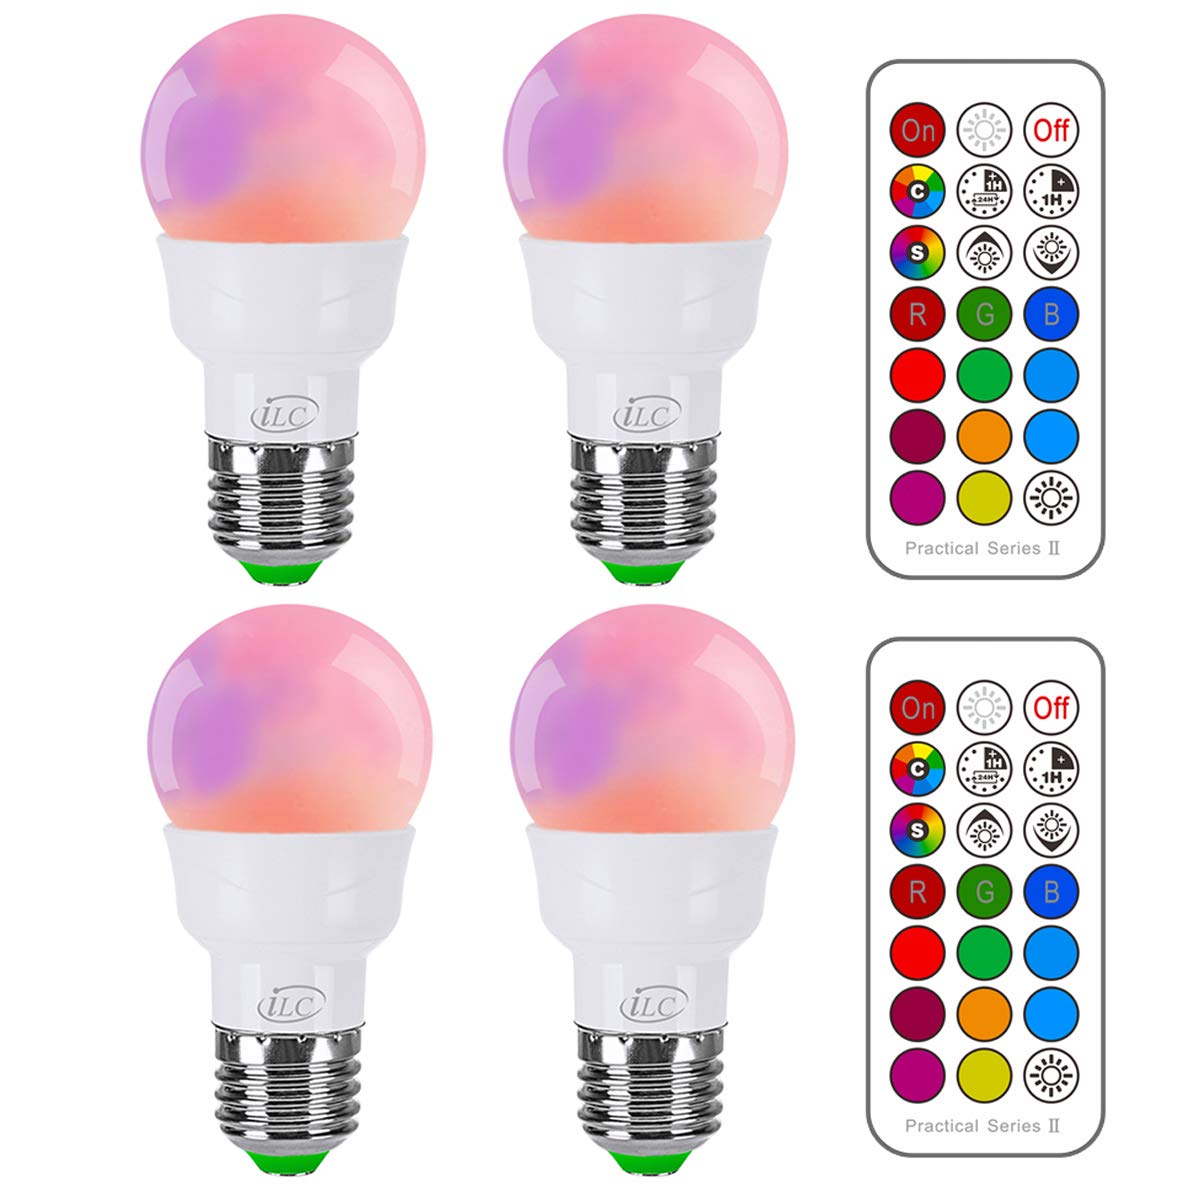 Book Cover iLC Color Changing Light Bulb Dimmable 3W E27 RGBW LED Lights [2017 NEW 2nd Generation], Mood Light - Dual Memory - 12 Color Choices - Timing IR Remote Controller Included (Pack of 4)